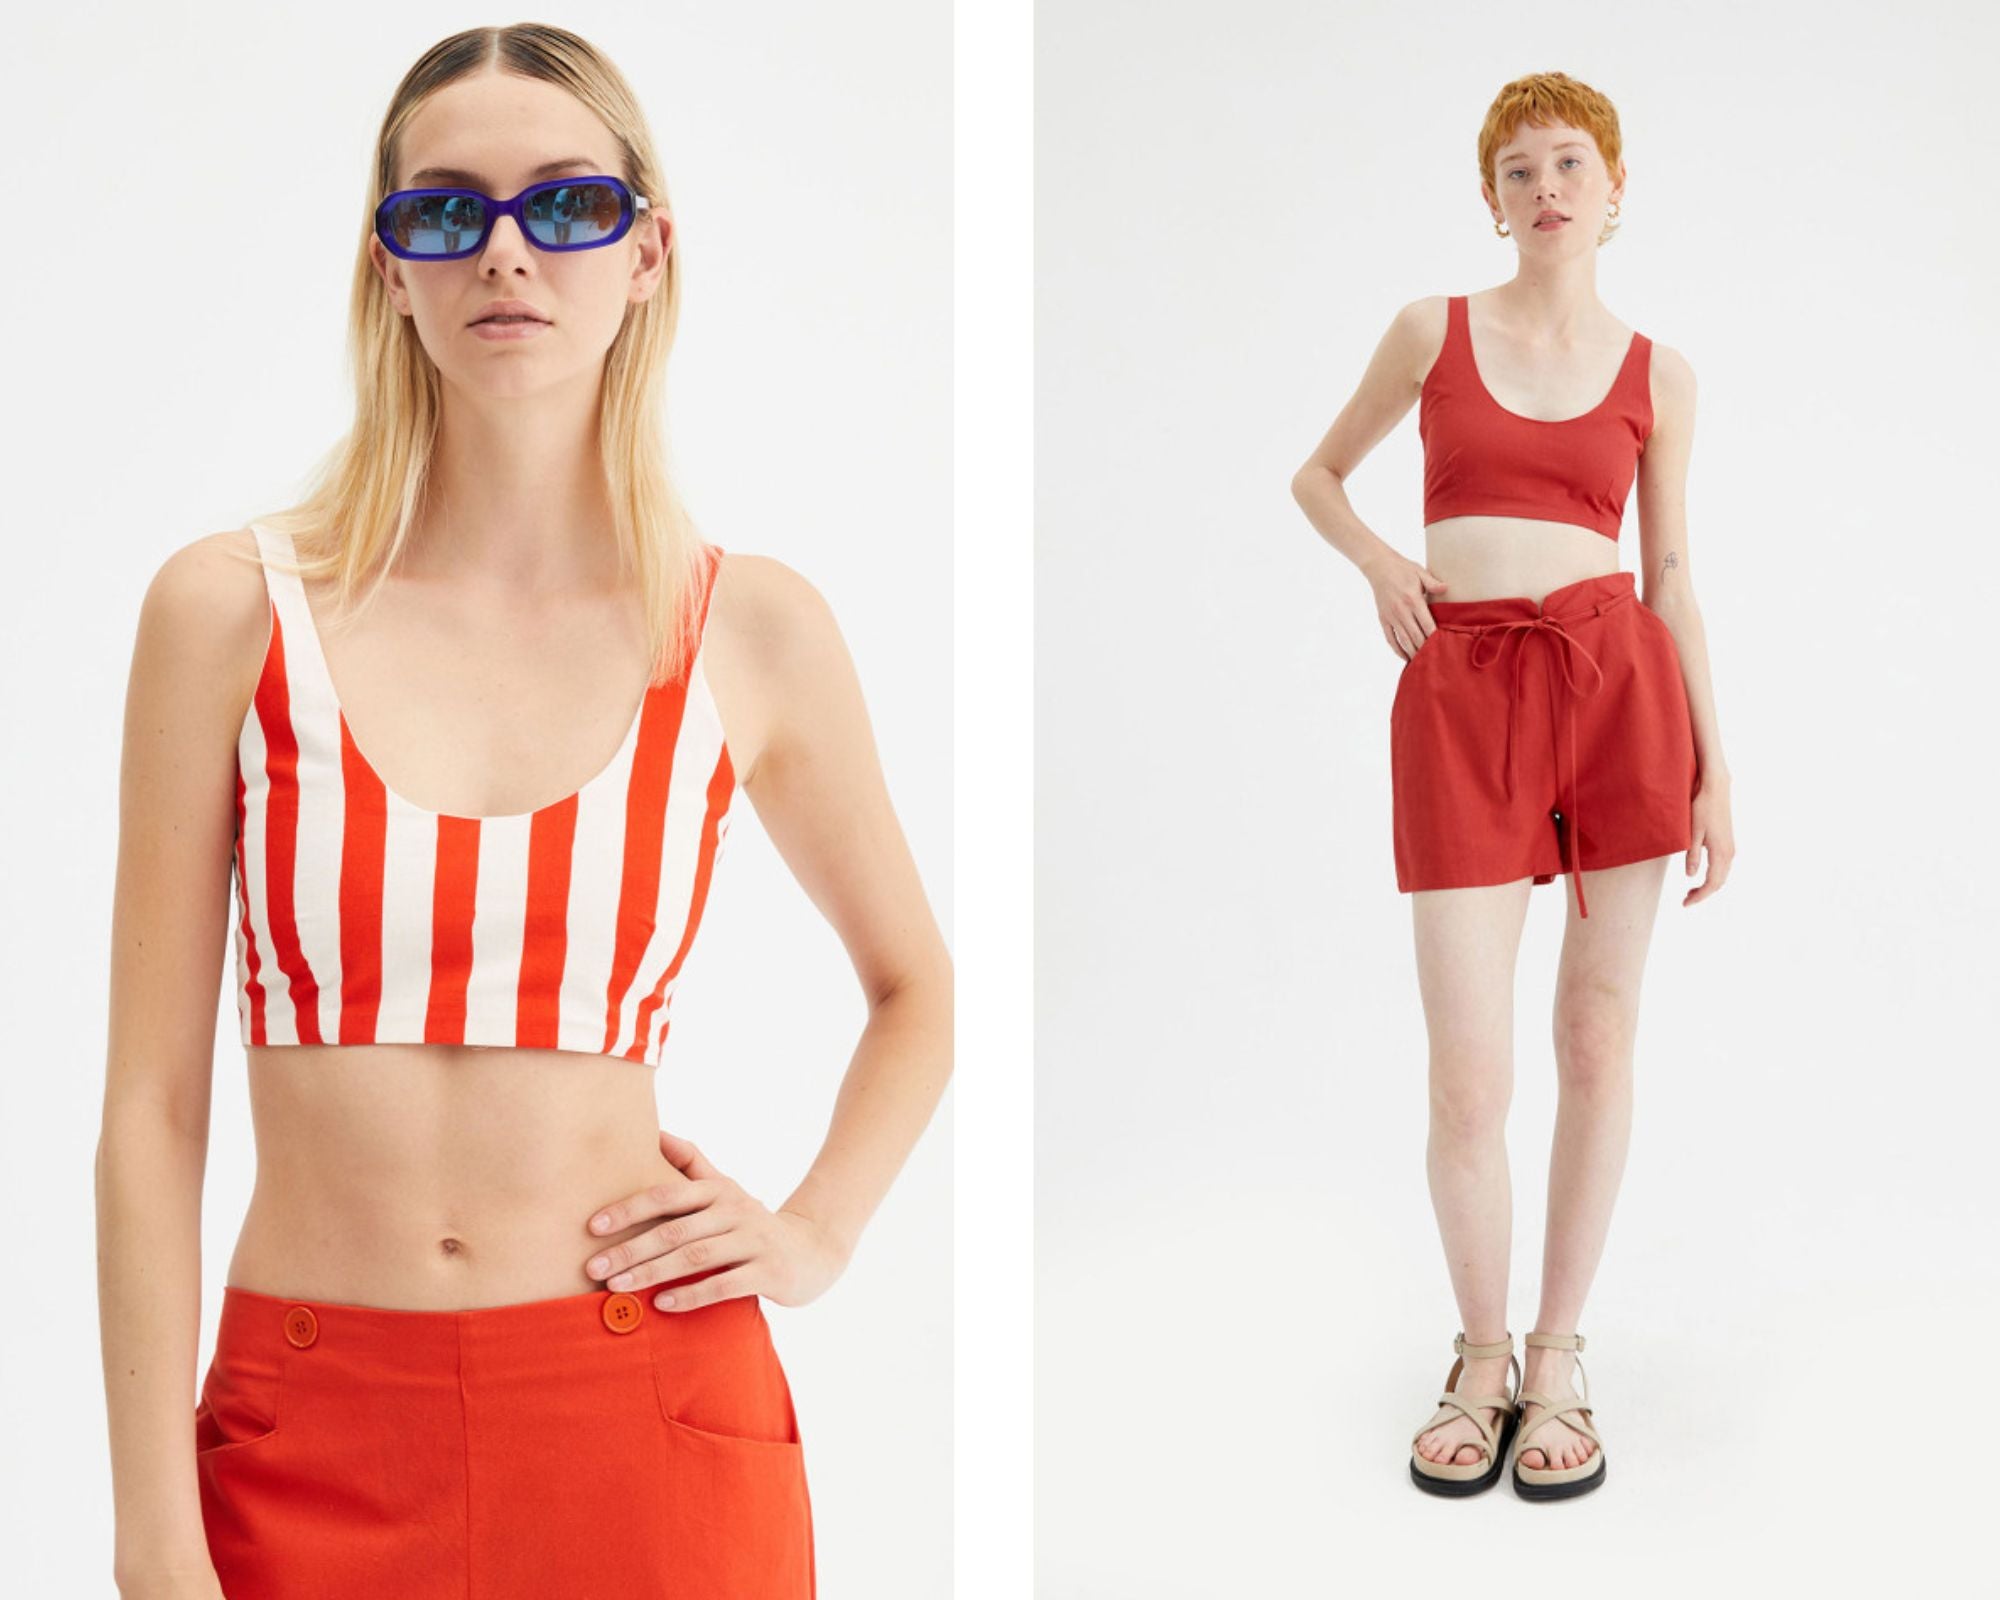 Women with striped crop top and high-waisted shorts from Compañía Fantástica.